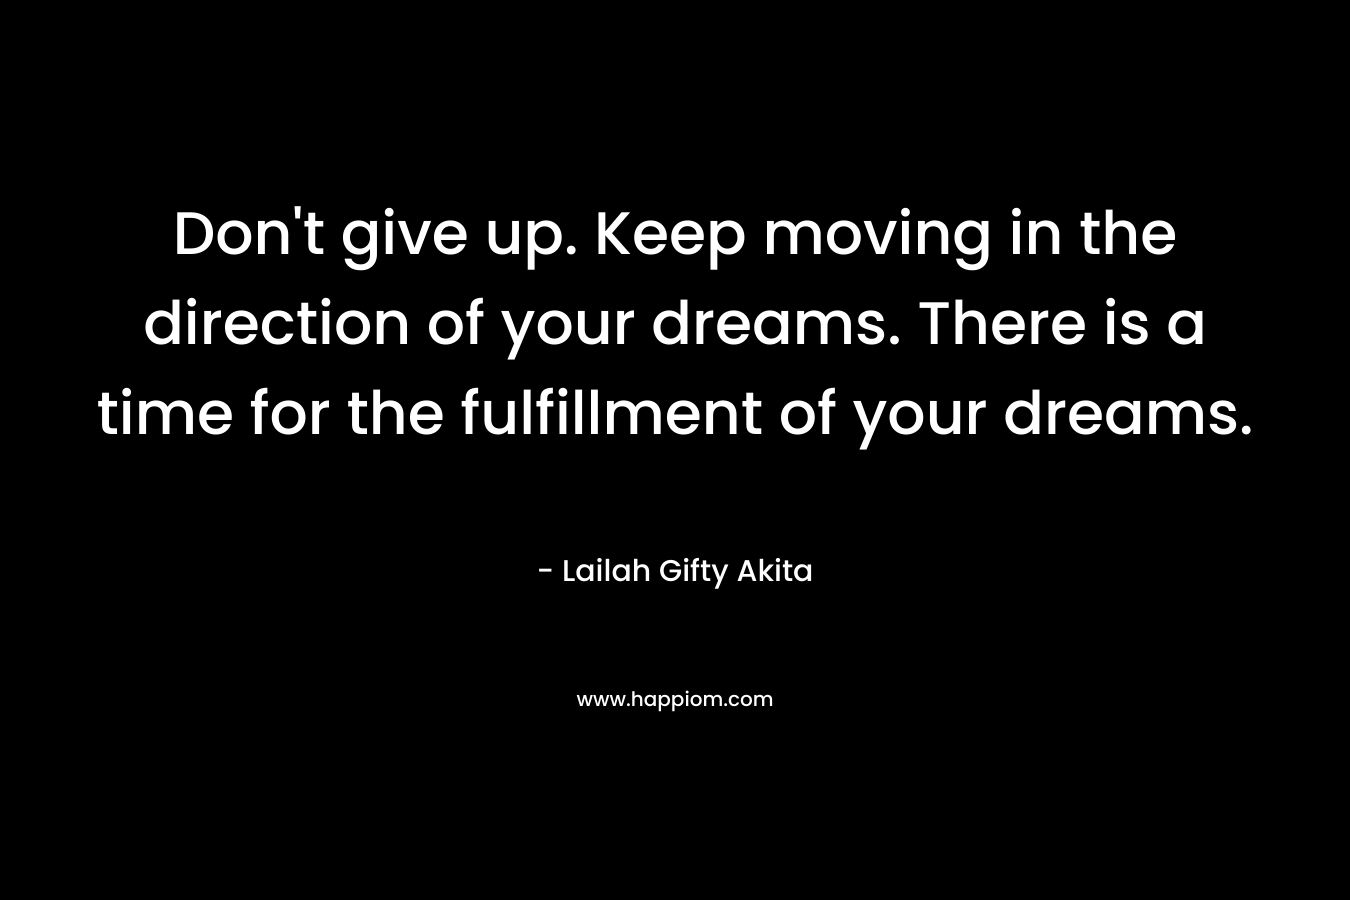 Don't give up. Keep moving in the direction of your dreams. There is a time for the fulfillment of your dreams.